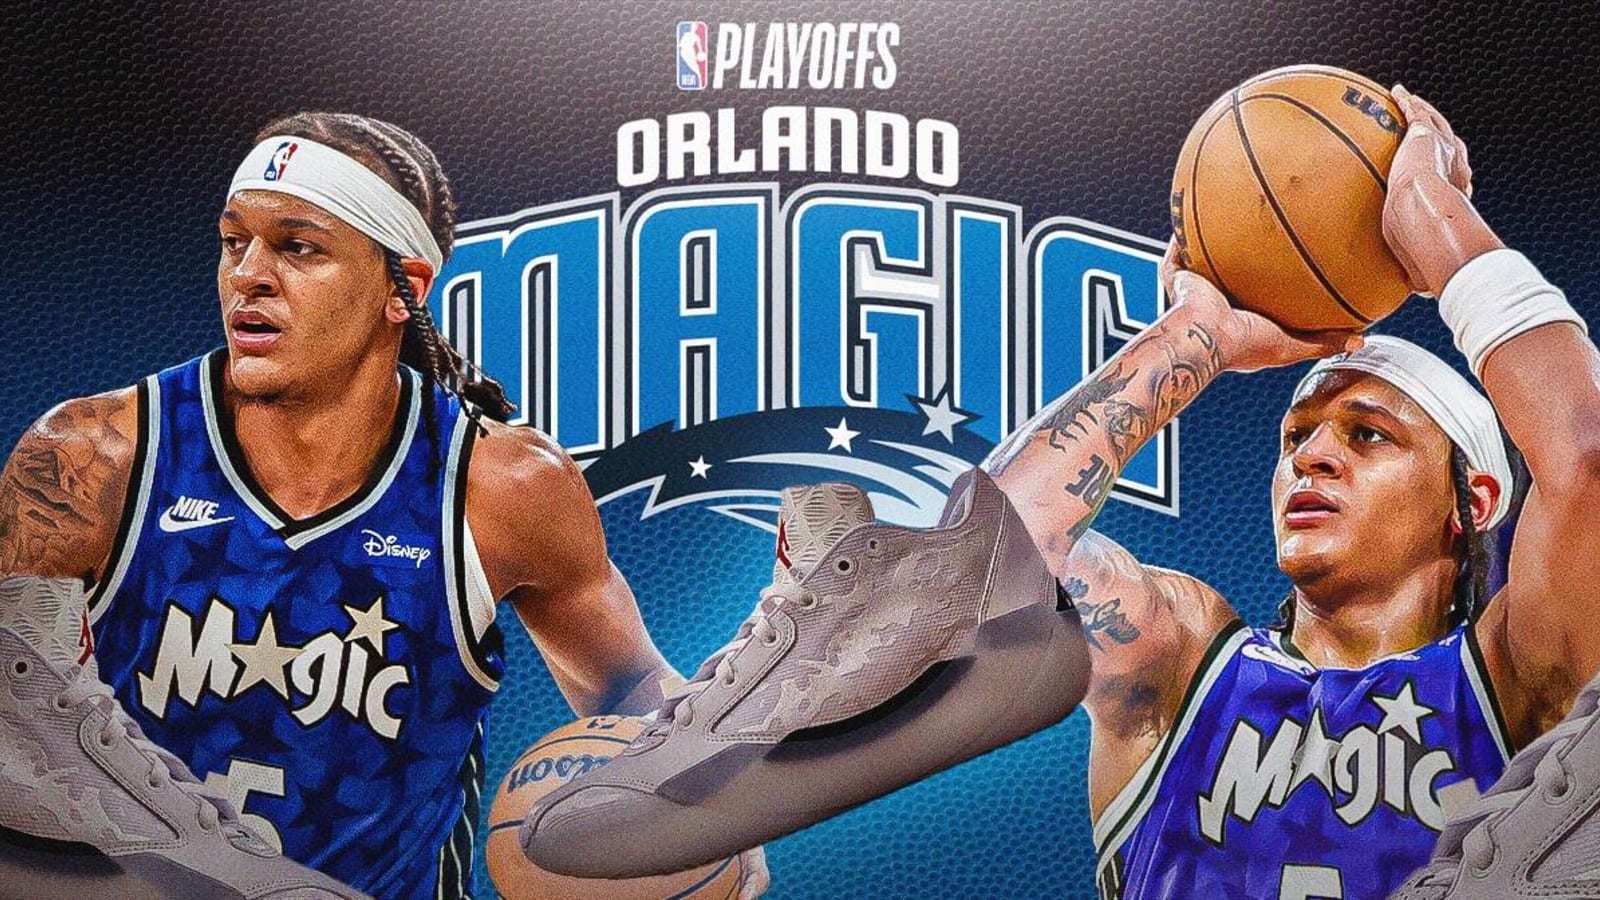 Paolo Banchero debuts the Air Jordan 39 for his first NBA Playoffs